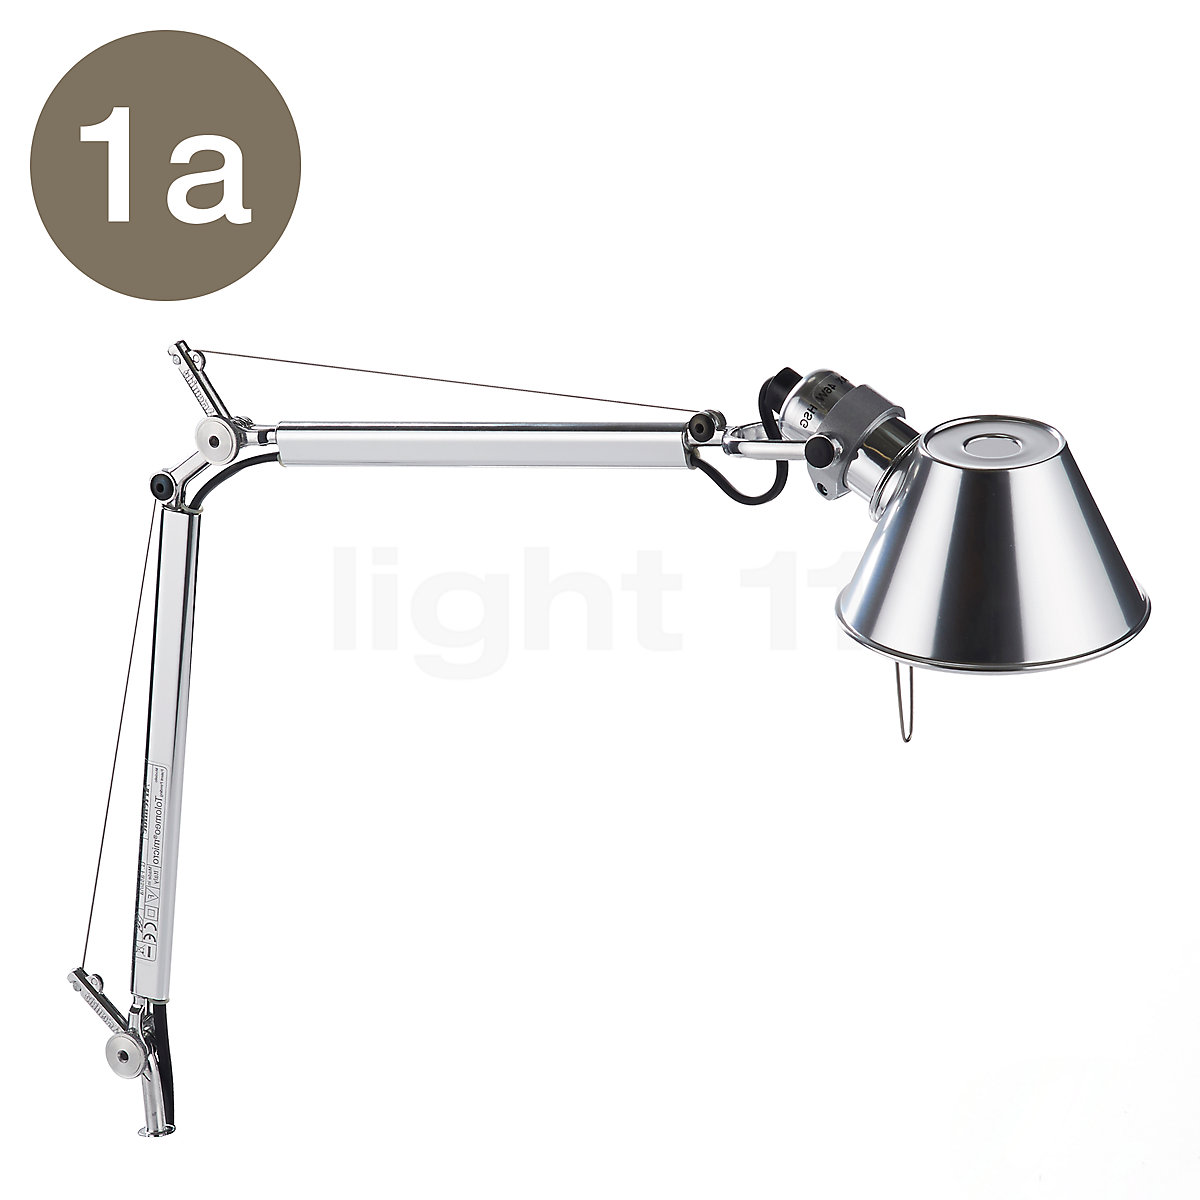 patroon vangst rok Buy Artemide Spare Parts for Tolomeo Micro at light11.eu